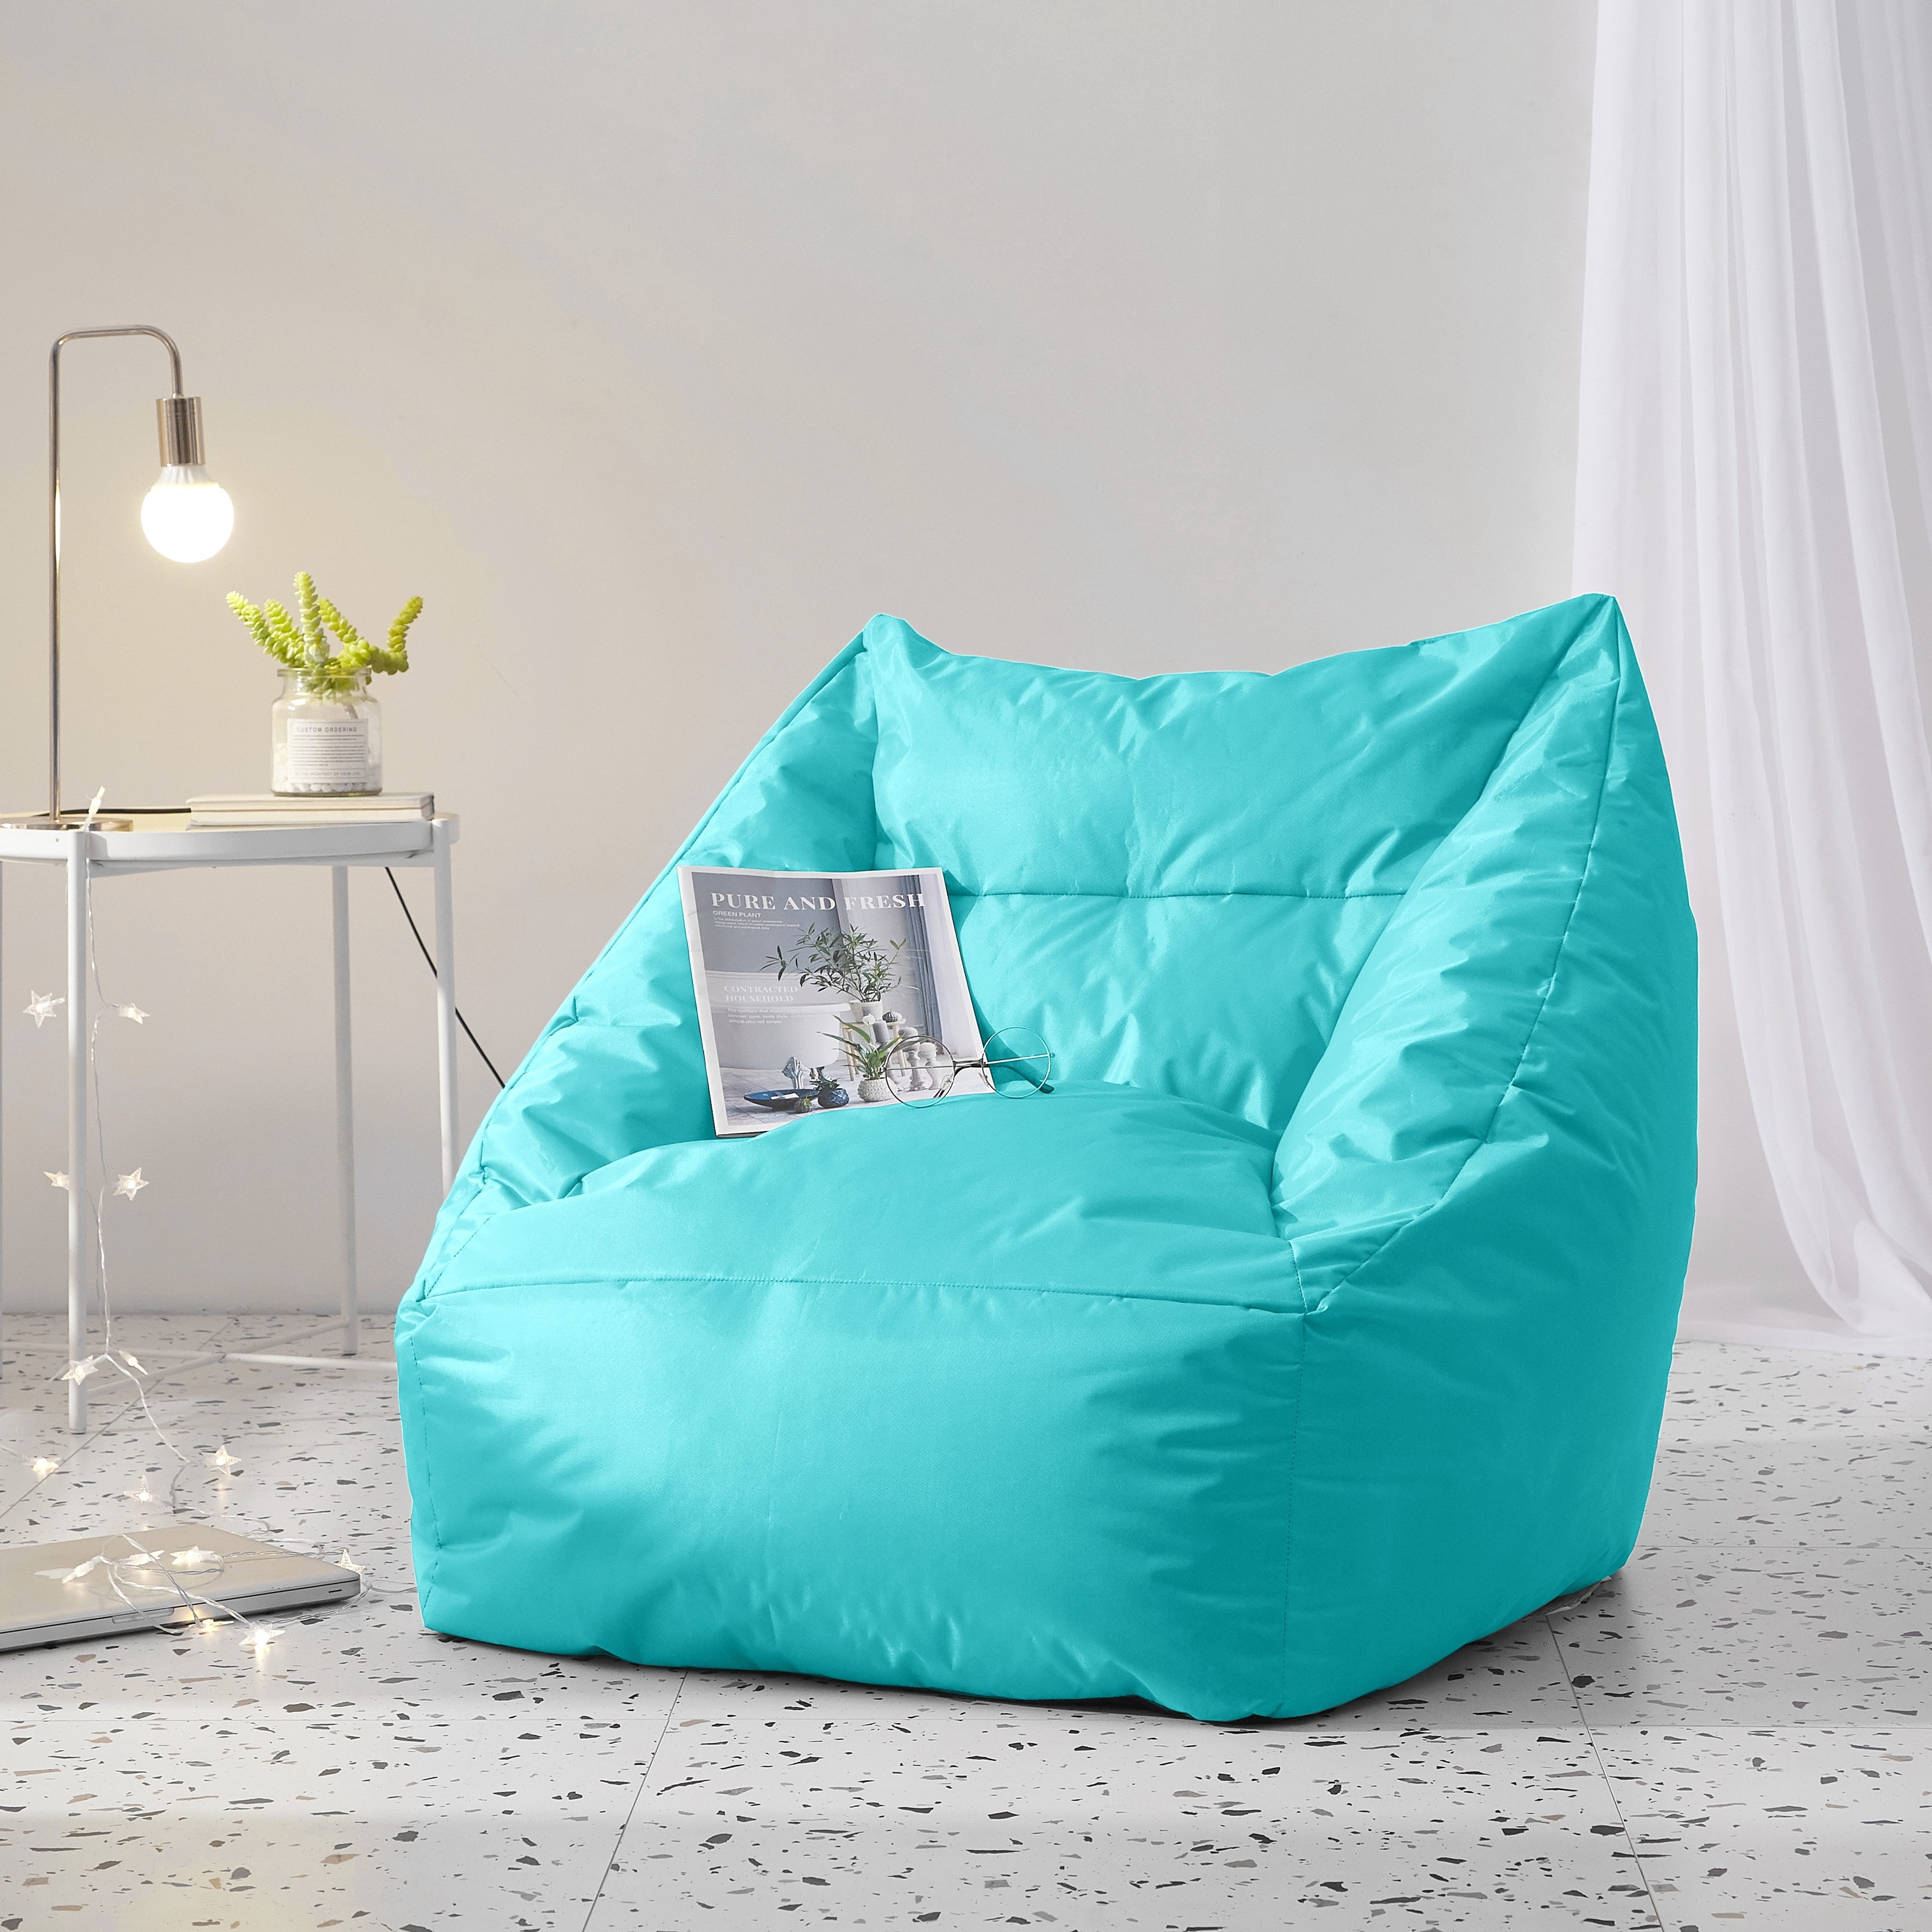  Bean Bag Chair,Bean Bag Chairs for Adults with Filling,Memory  Foam Bean Bag Chair,Structured Comfy Bean Bag Sofa for Gaming, Reading, and  Watching TV,White : Home & Kitchen